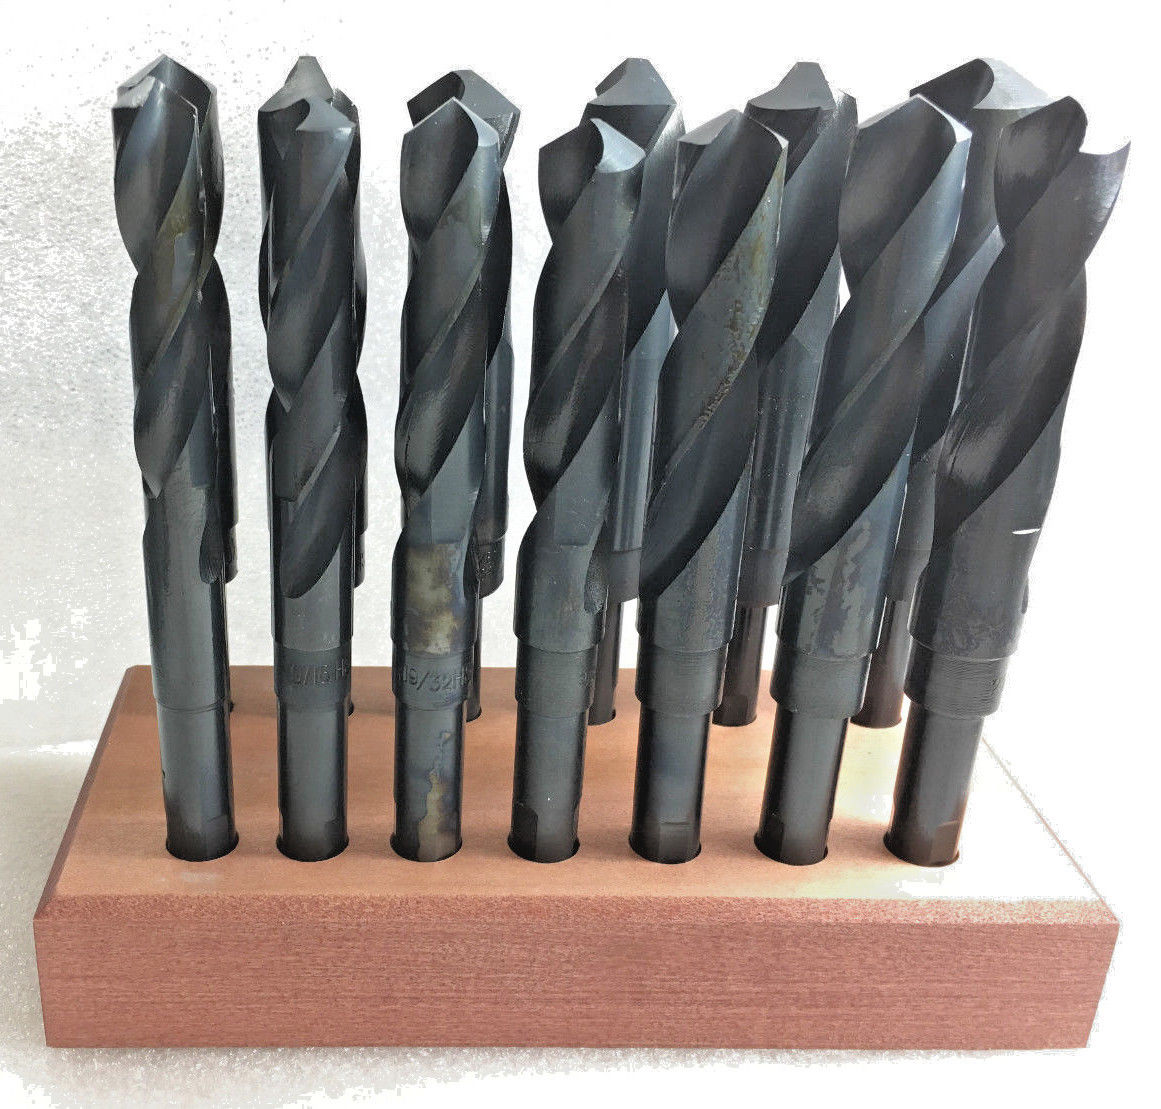 17 pc 1/2'' Shank High Speed Drill Set Sizes: 17/32" to 1 1/32" Wooden Stand